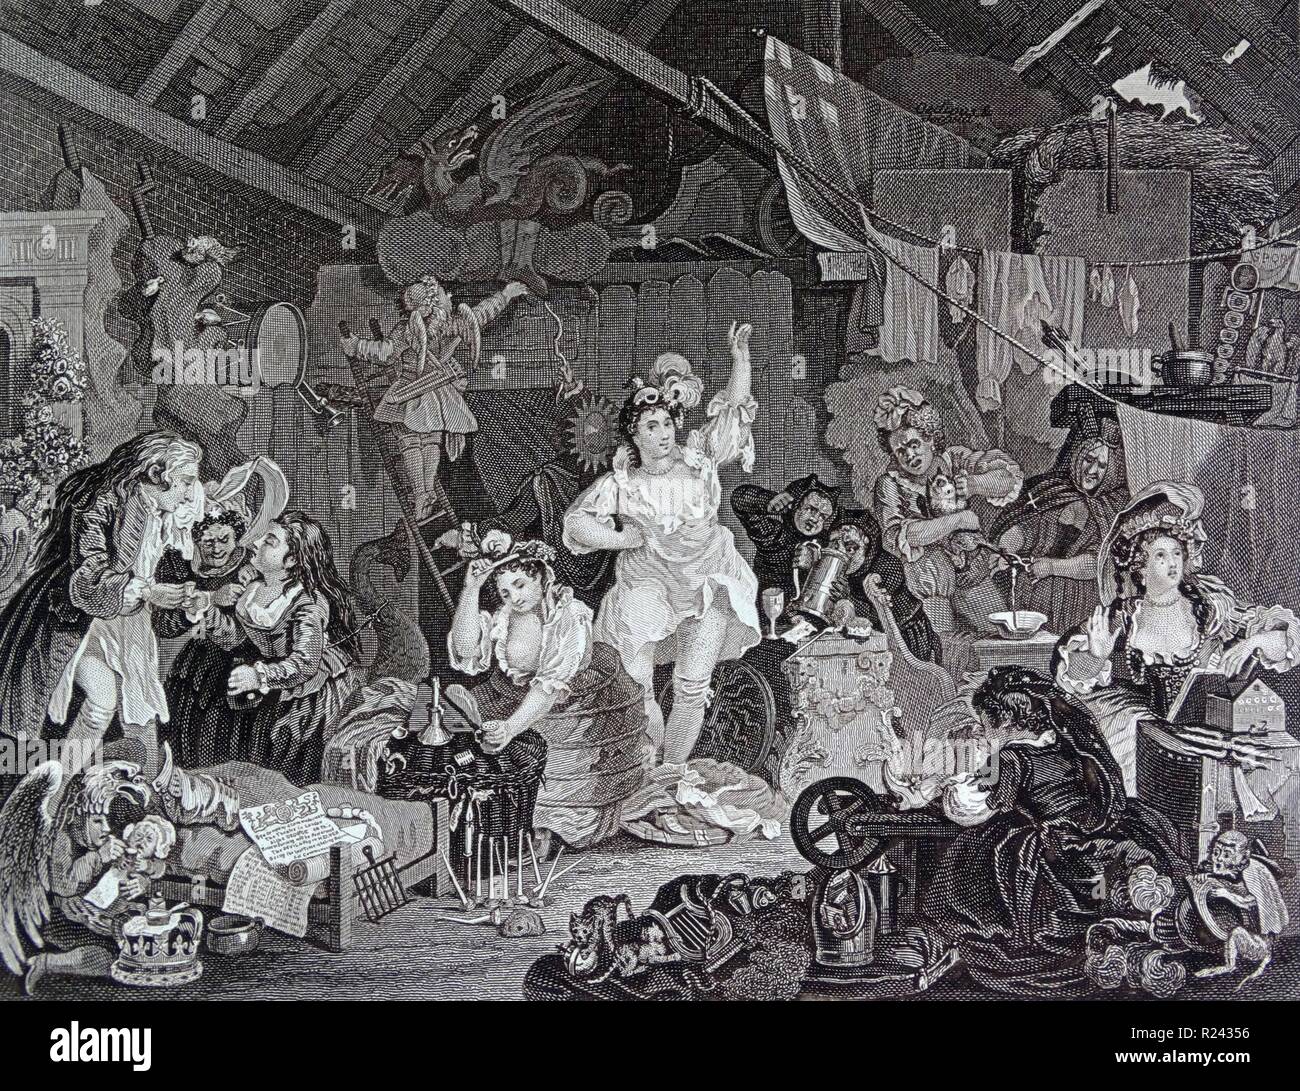 Engraving by British artist & engraver, William Hogarth 1697-1764: Strolling Actresses Dressing in a Barn 1738. depicts a company of actresses preparing for their final performance before the troupe is disbanded as a result of the Licensing Act 1737 18th century Stock Photo